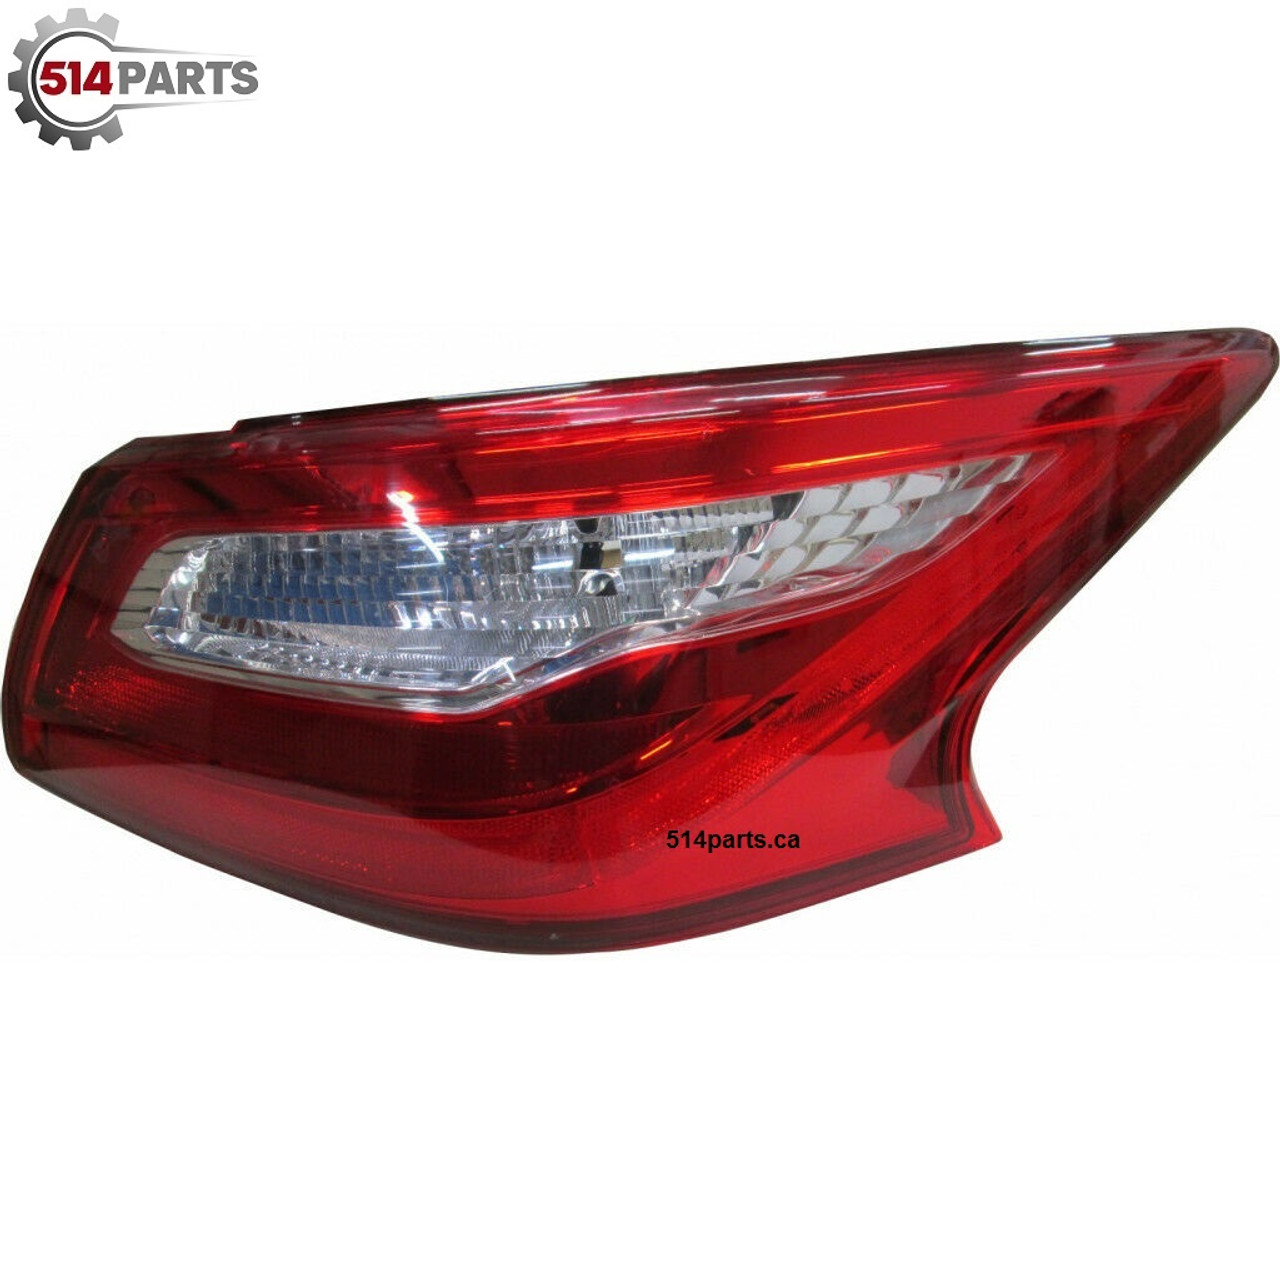 2018 NISSAN ALTIMA without SMOKE HOUSING TAIL LIGHTS High Quality - PHARES ARRIERE sans BOITIER DE FUMEE Haute Qualite